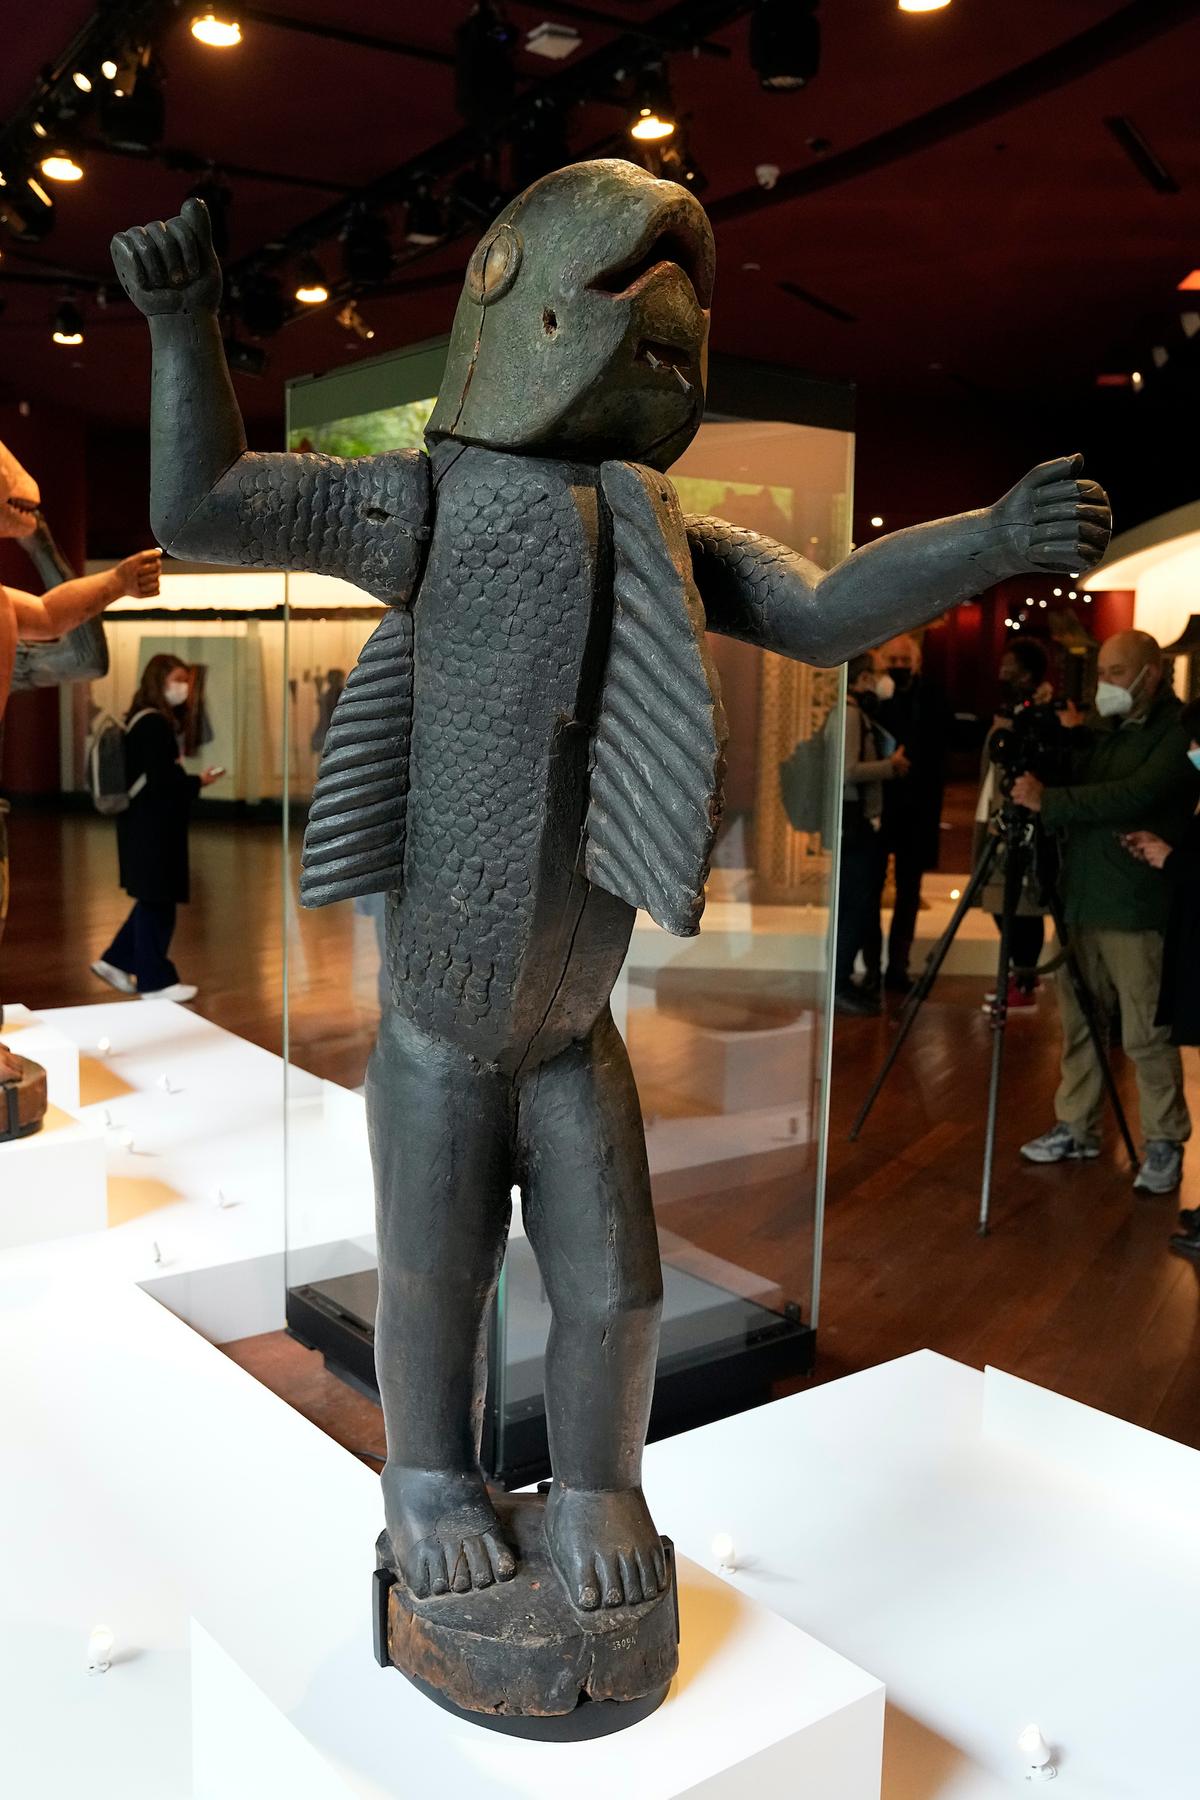 A royal statue of Benin's 19th century King Behanzin is pictured at the Quai Branly–Jacques Chirac museum in Paris, on Oct. 25, 2021. (Michel Euler/AP Photo)